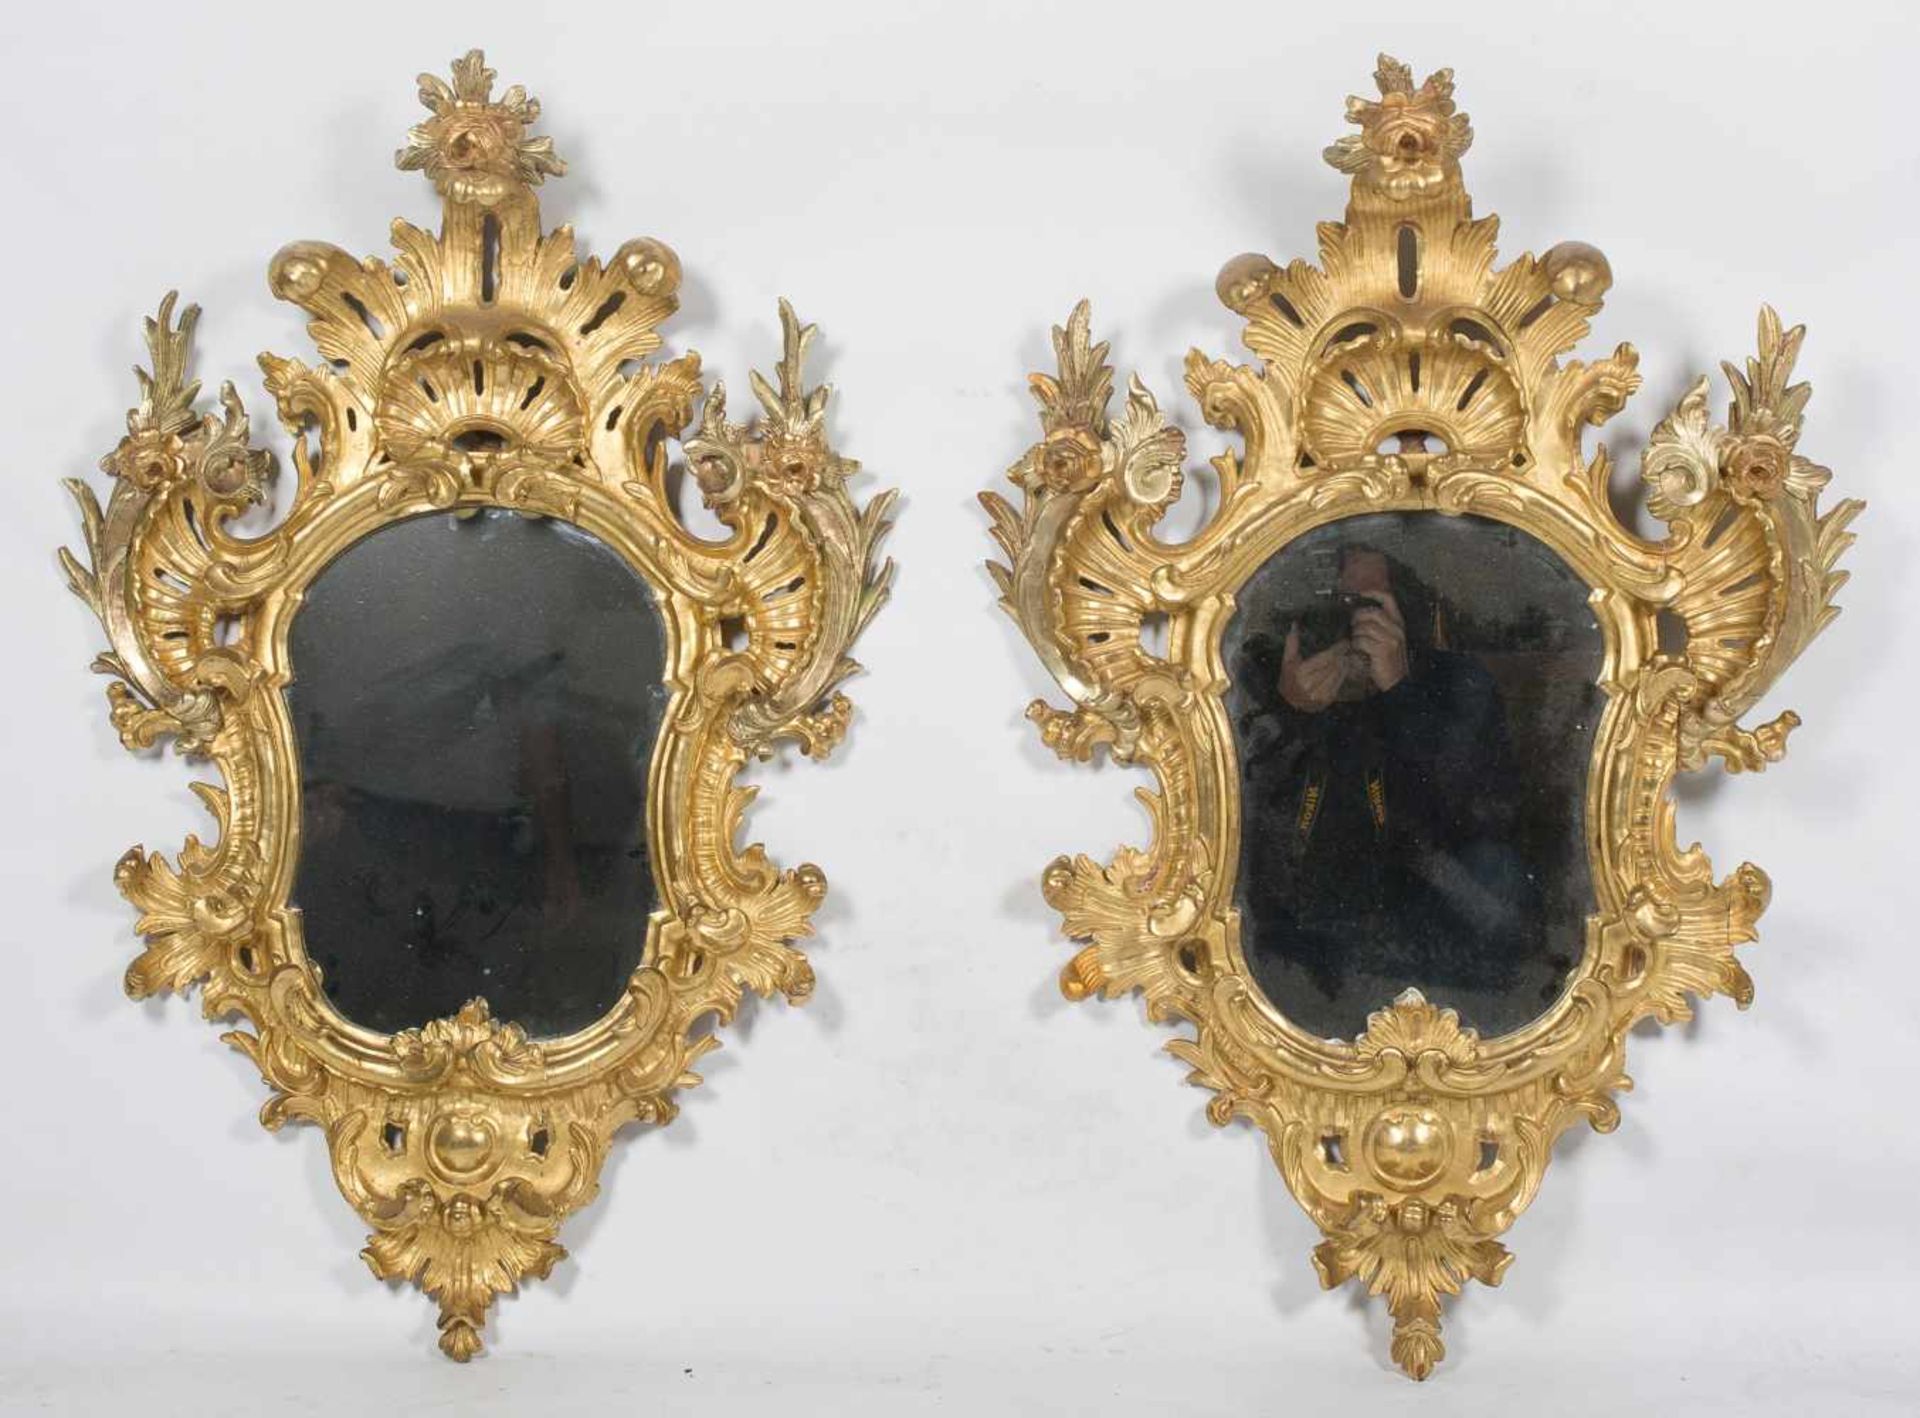 Pair of carved cornucopias gilded in three golds. Charles III period (Spain). 18th century.